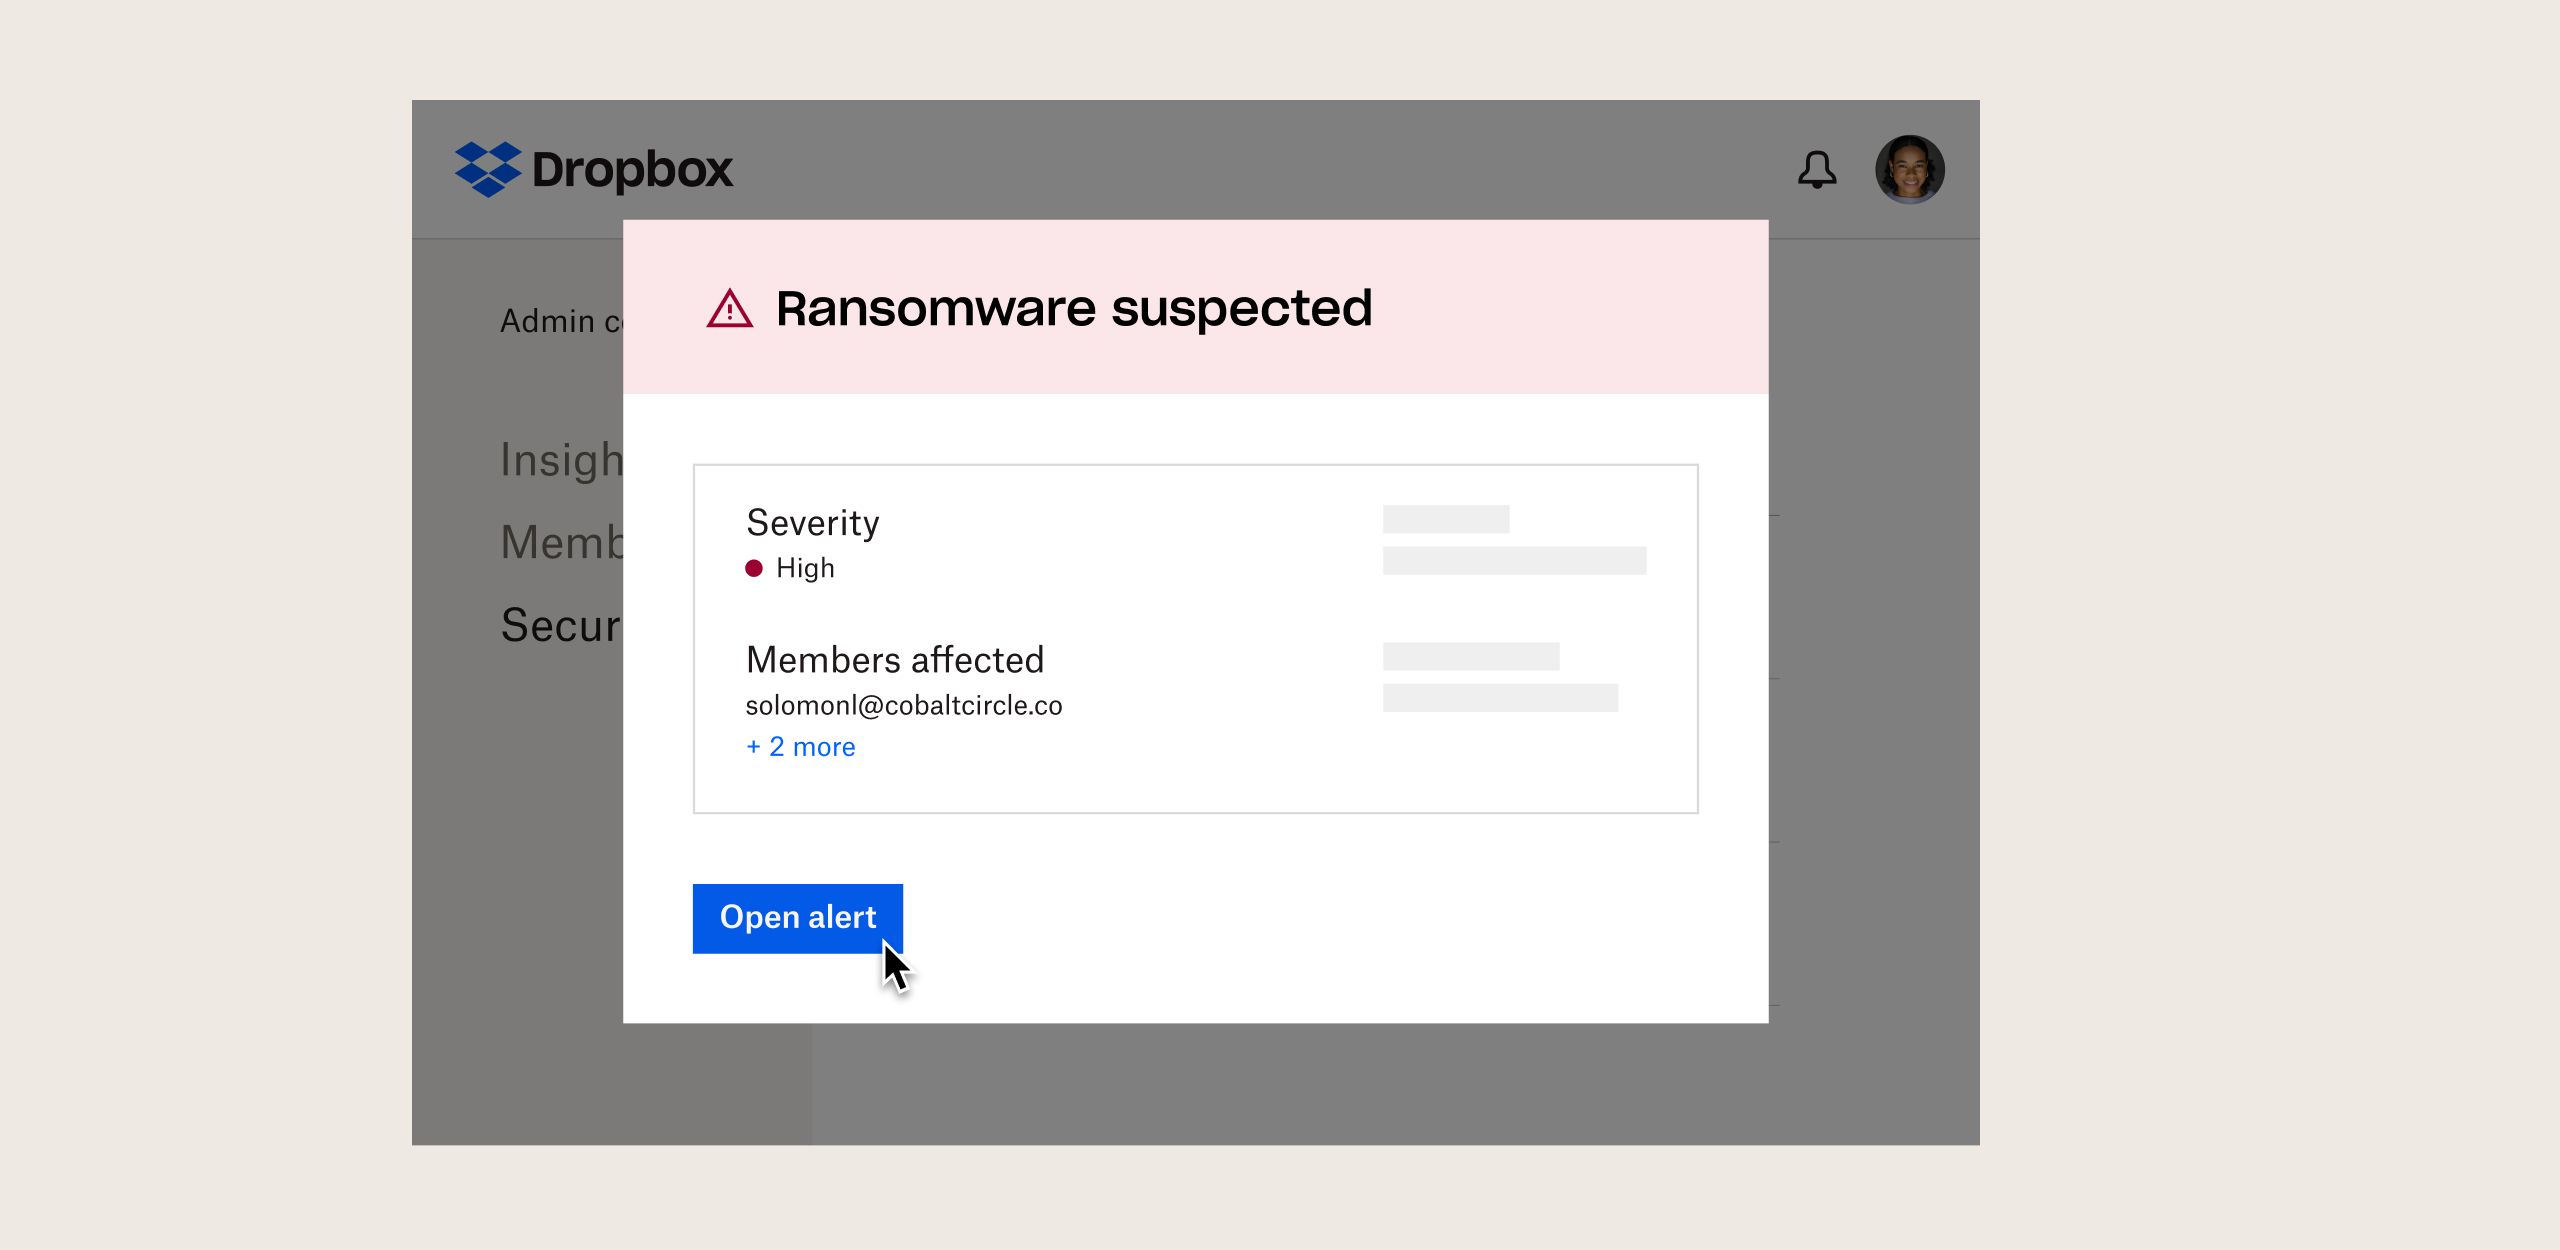 A user views a ransomware suspected security prompt in Dropbox